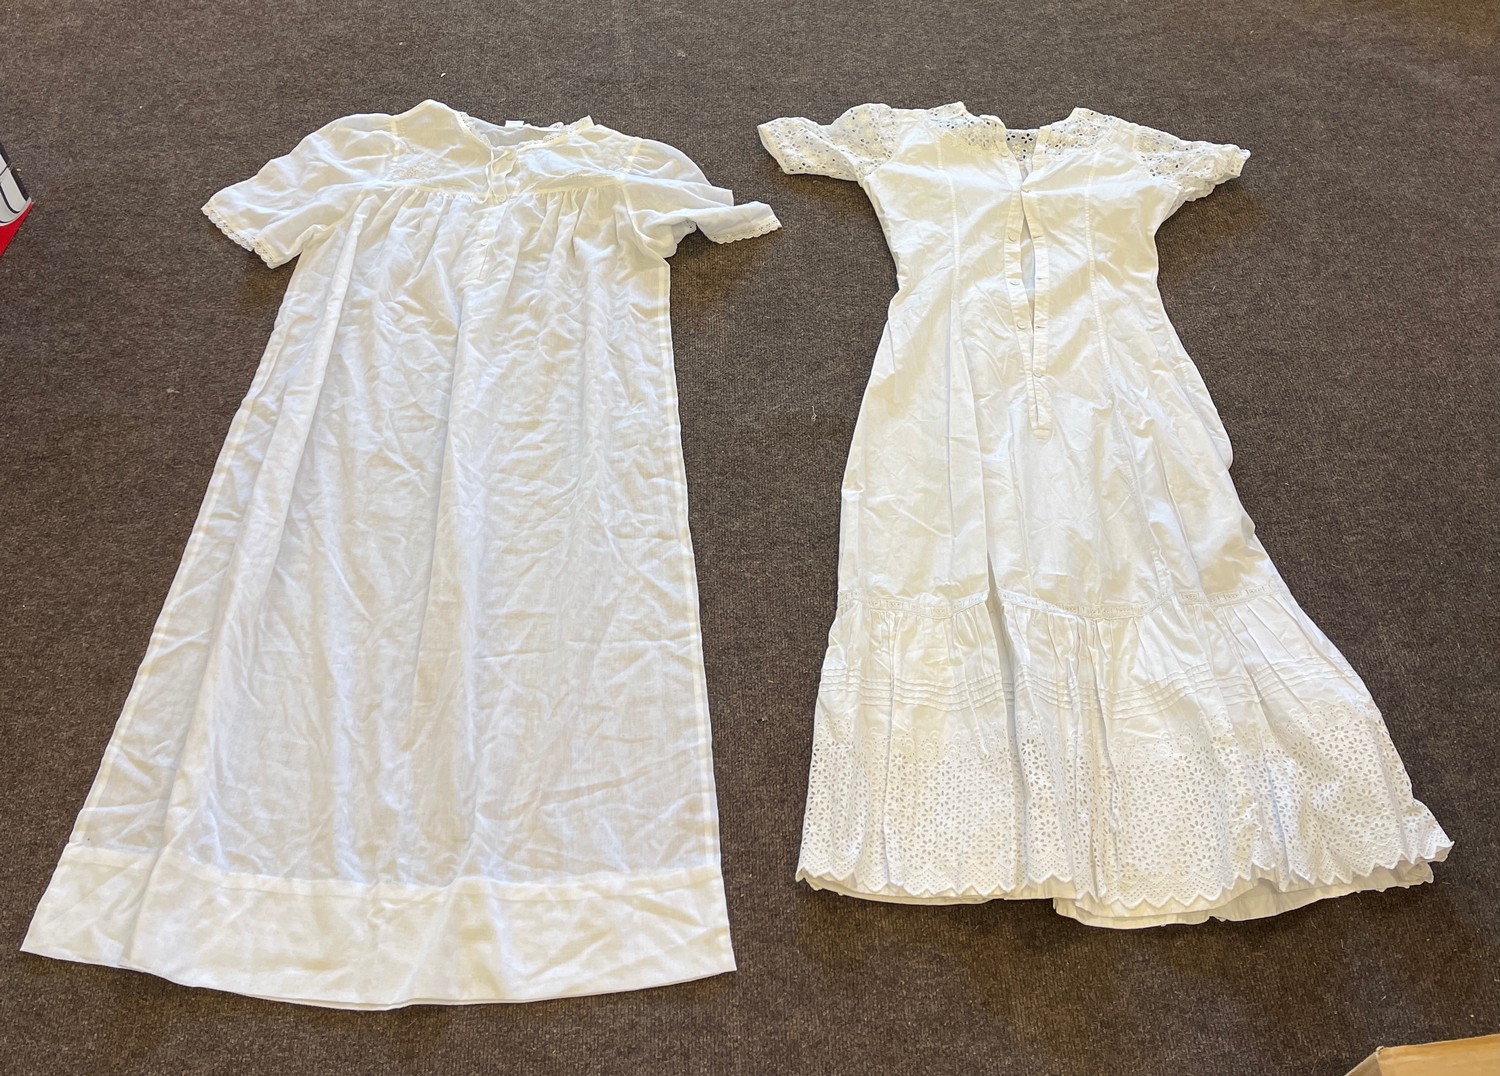 Selection of 6 antique lace / linen ladies nightwear